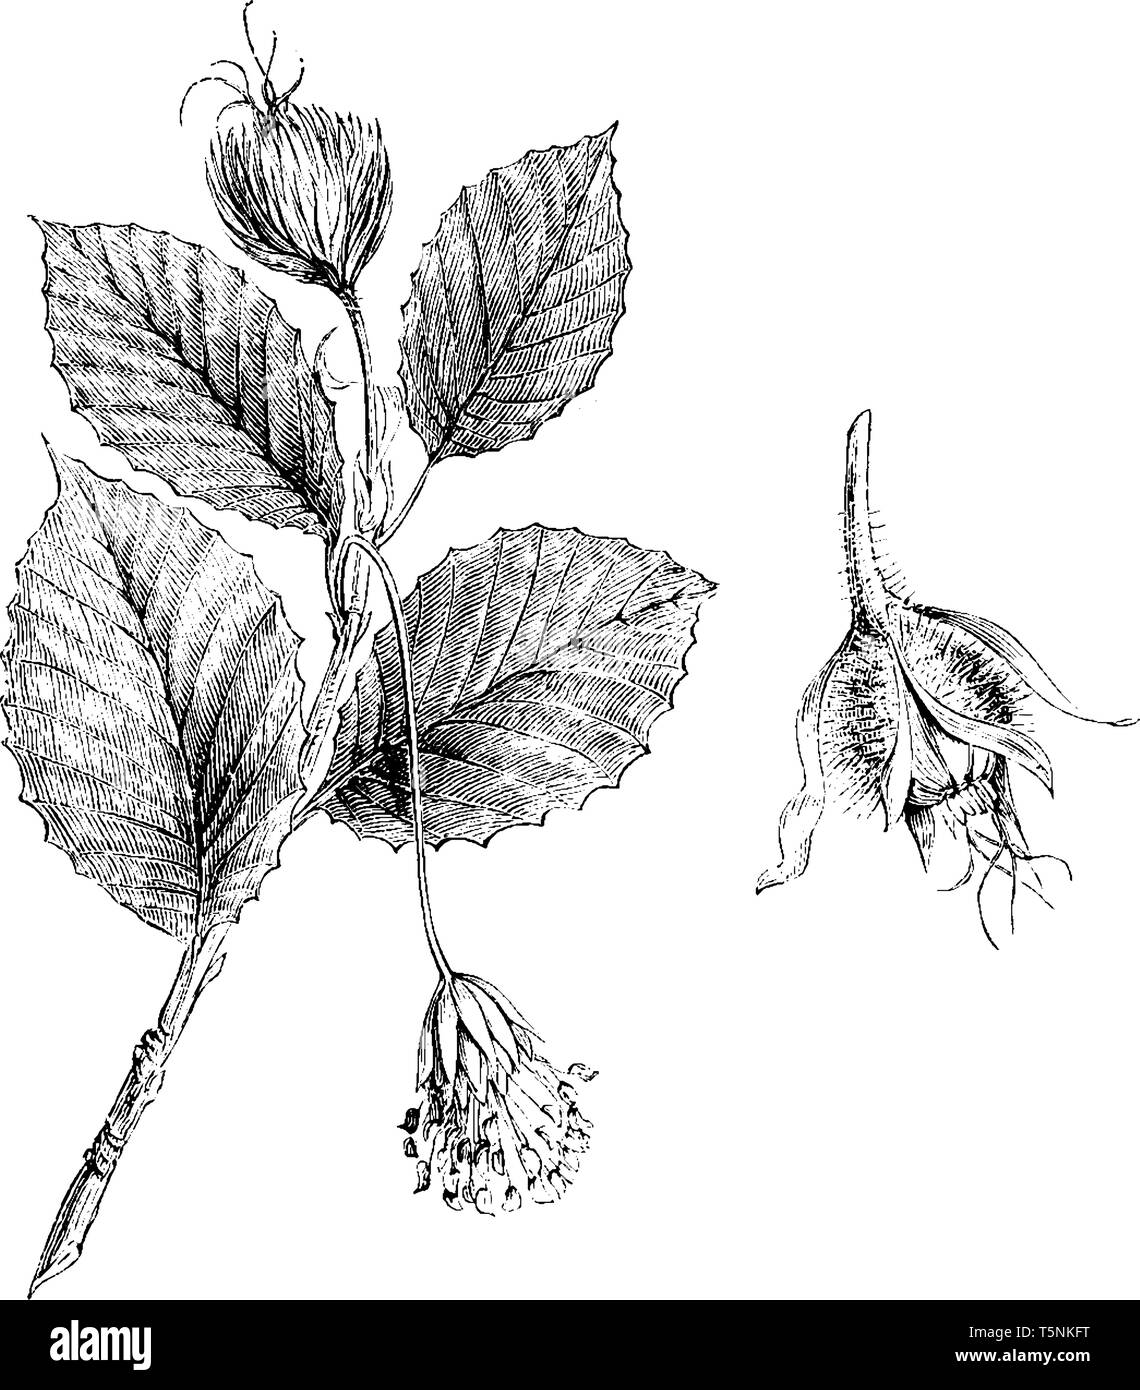 A picture is showing Branchlet of Fagus Sylvatica with Male and Female Flowers. Fagus Sylvatica is commonly known as Common Beech and it belongs to Be Stock Vector